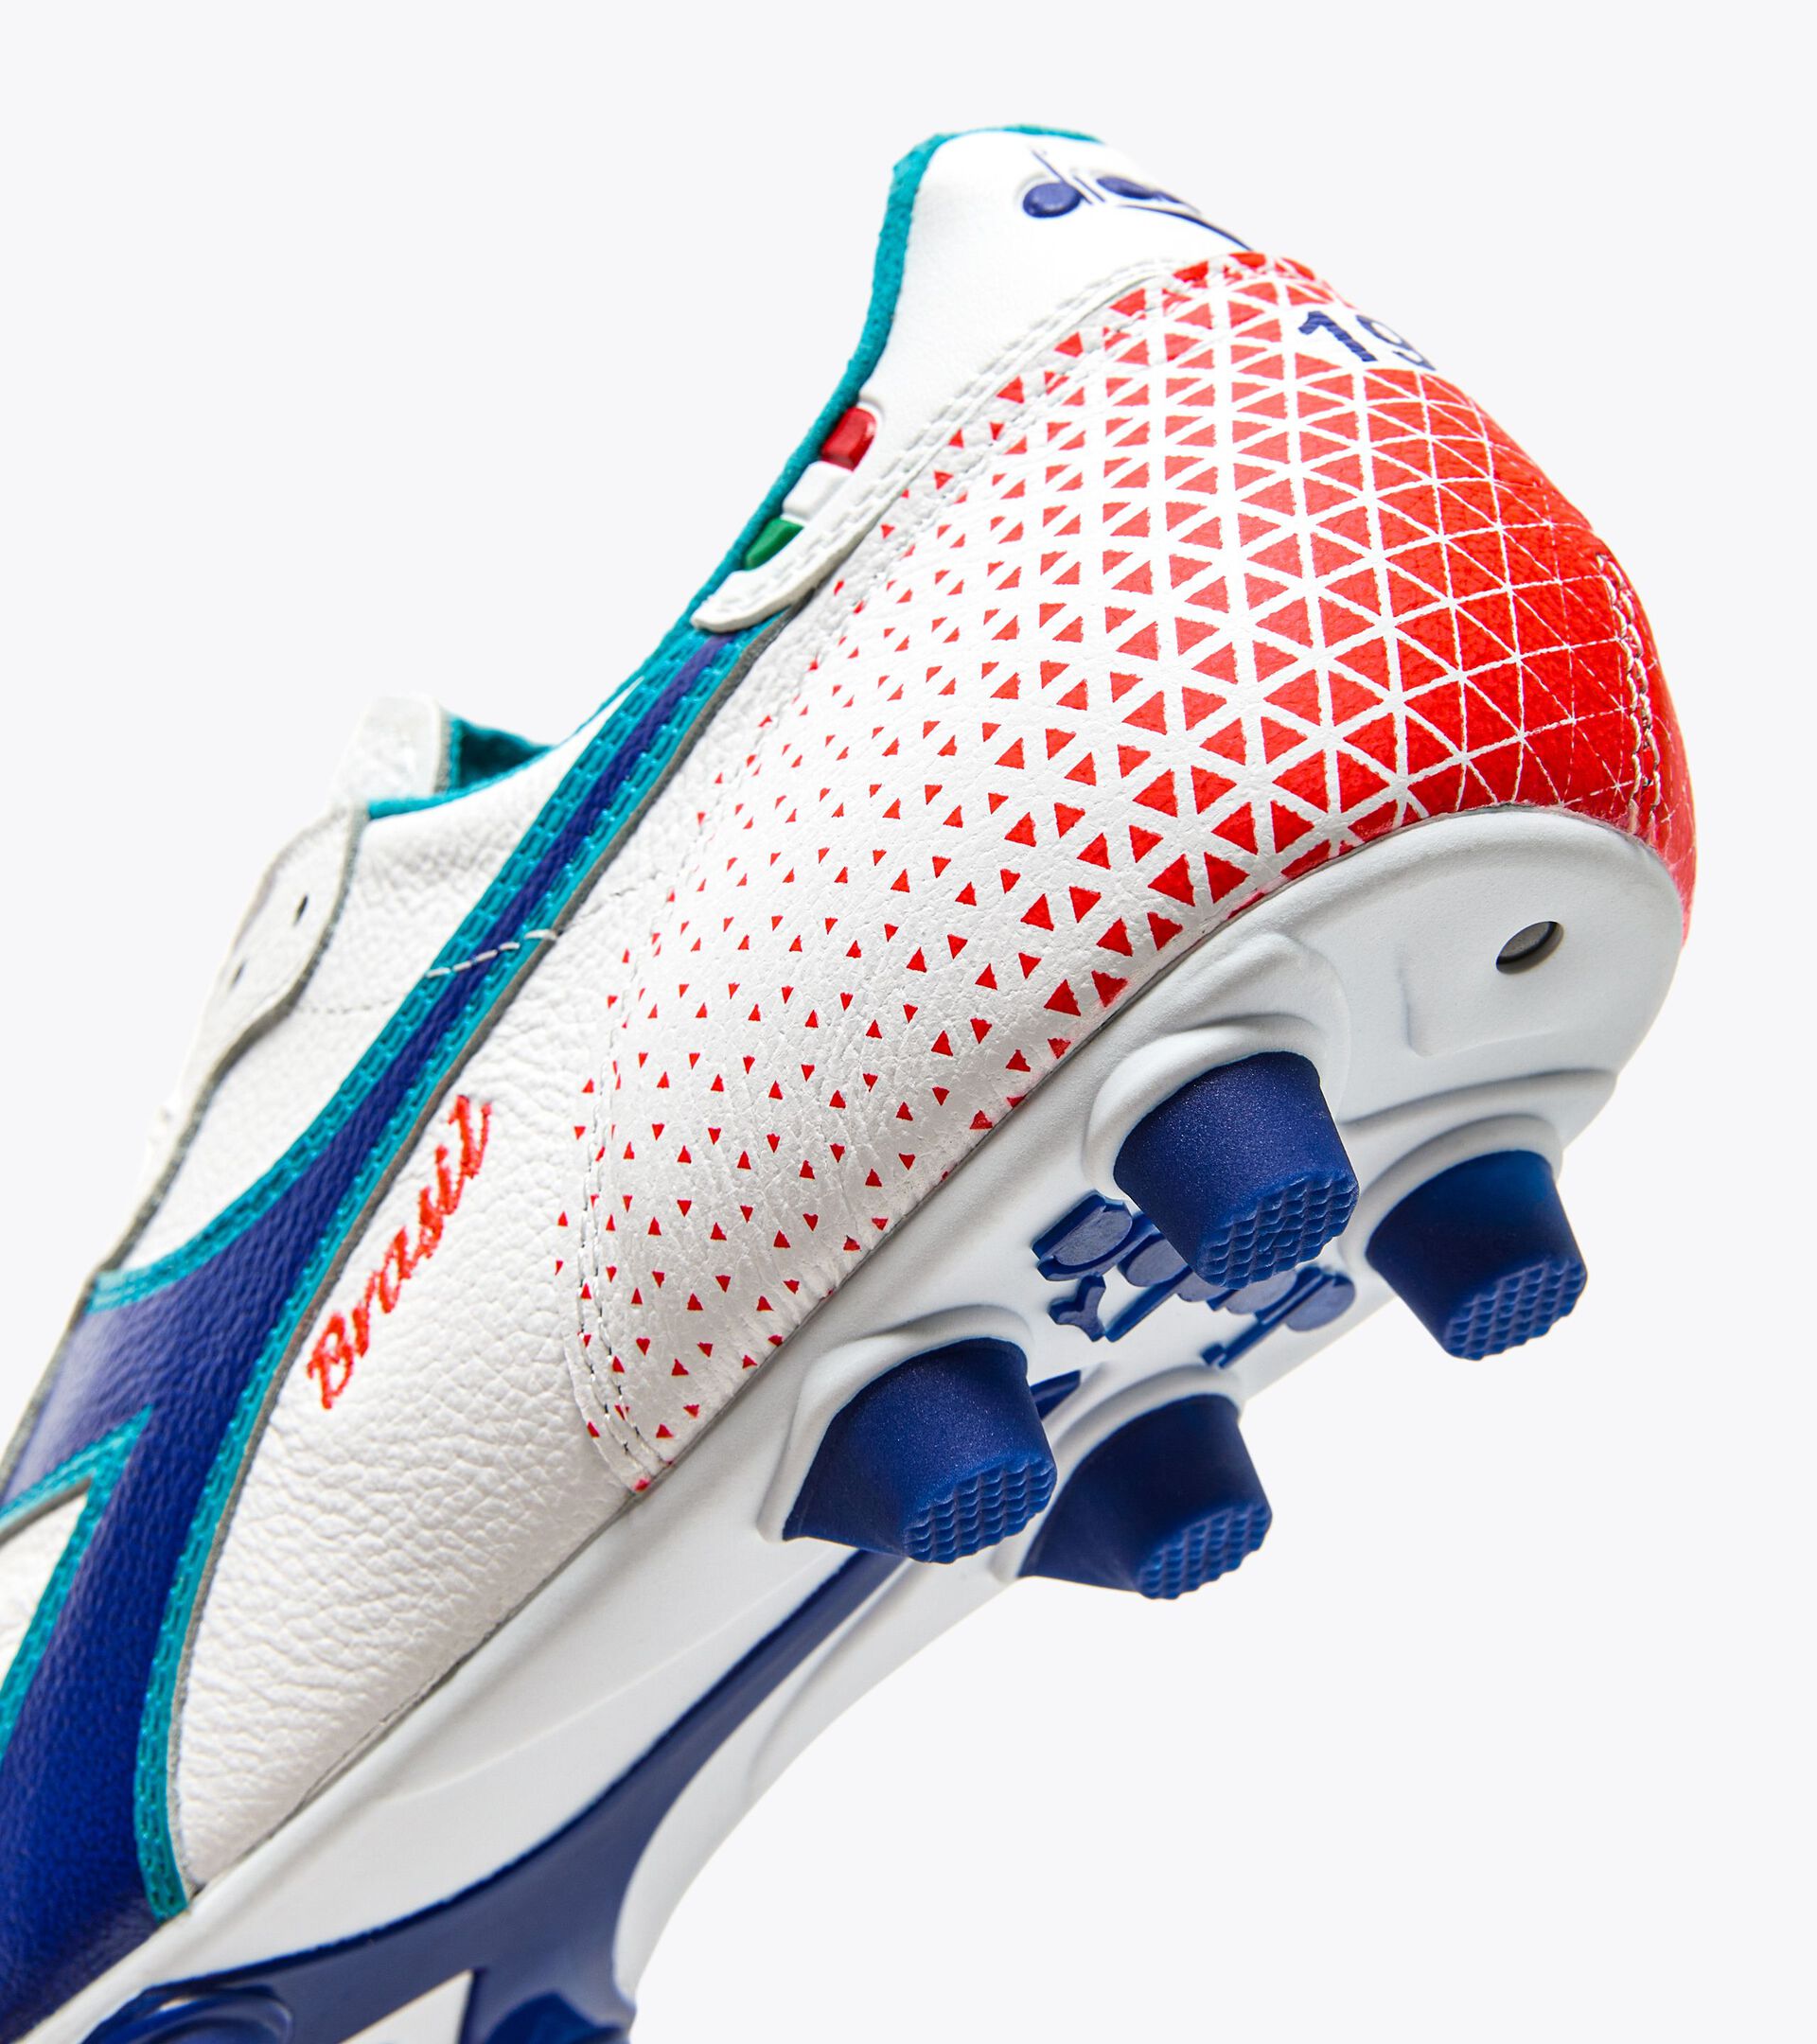 Calcio boots for firm grounds - Made in Italy - Gender Neutral BRASIL ITALY OG GR LT+  MDPU WHITE/NAVY - Diadora